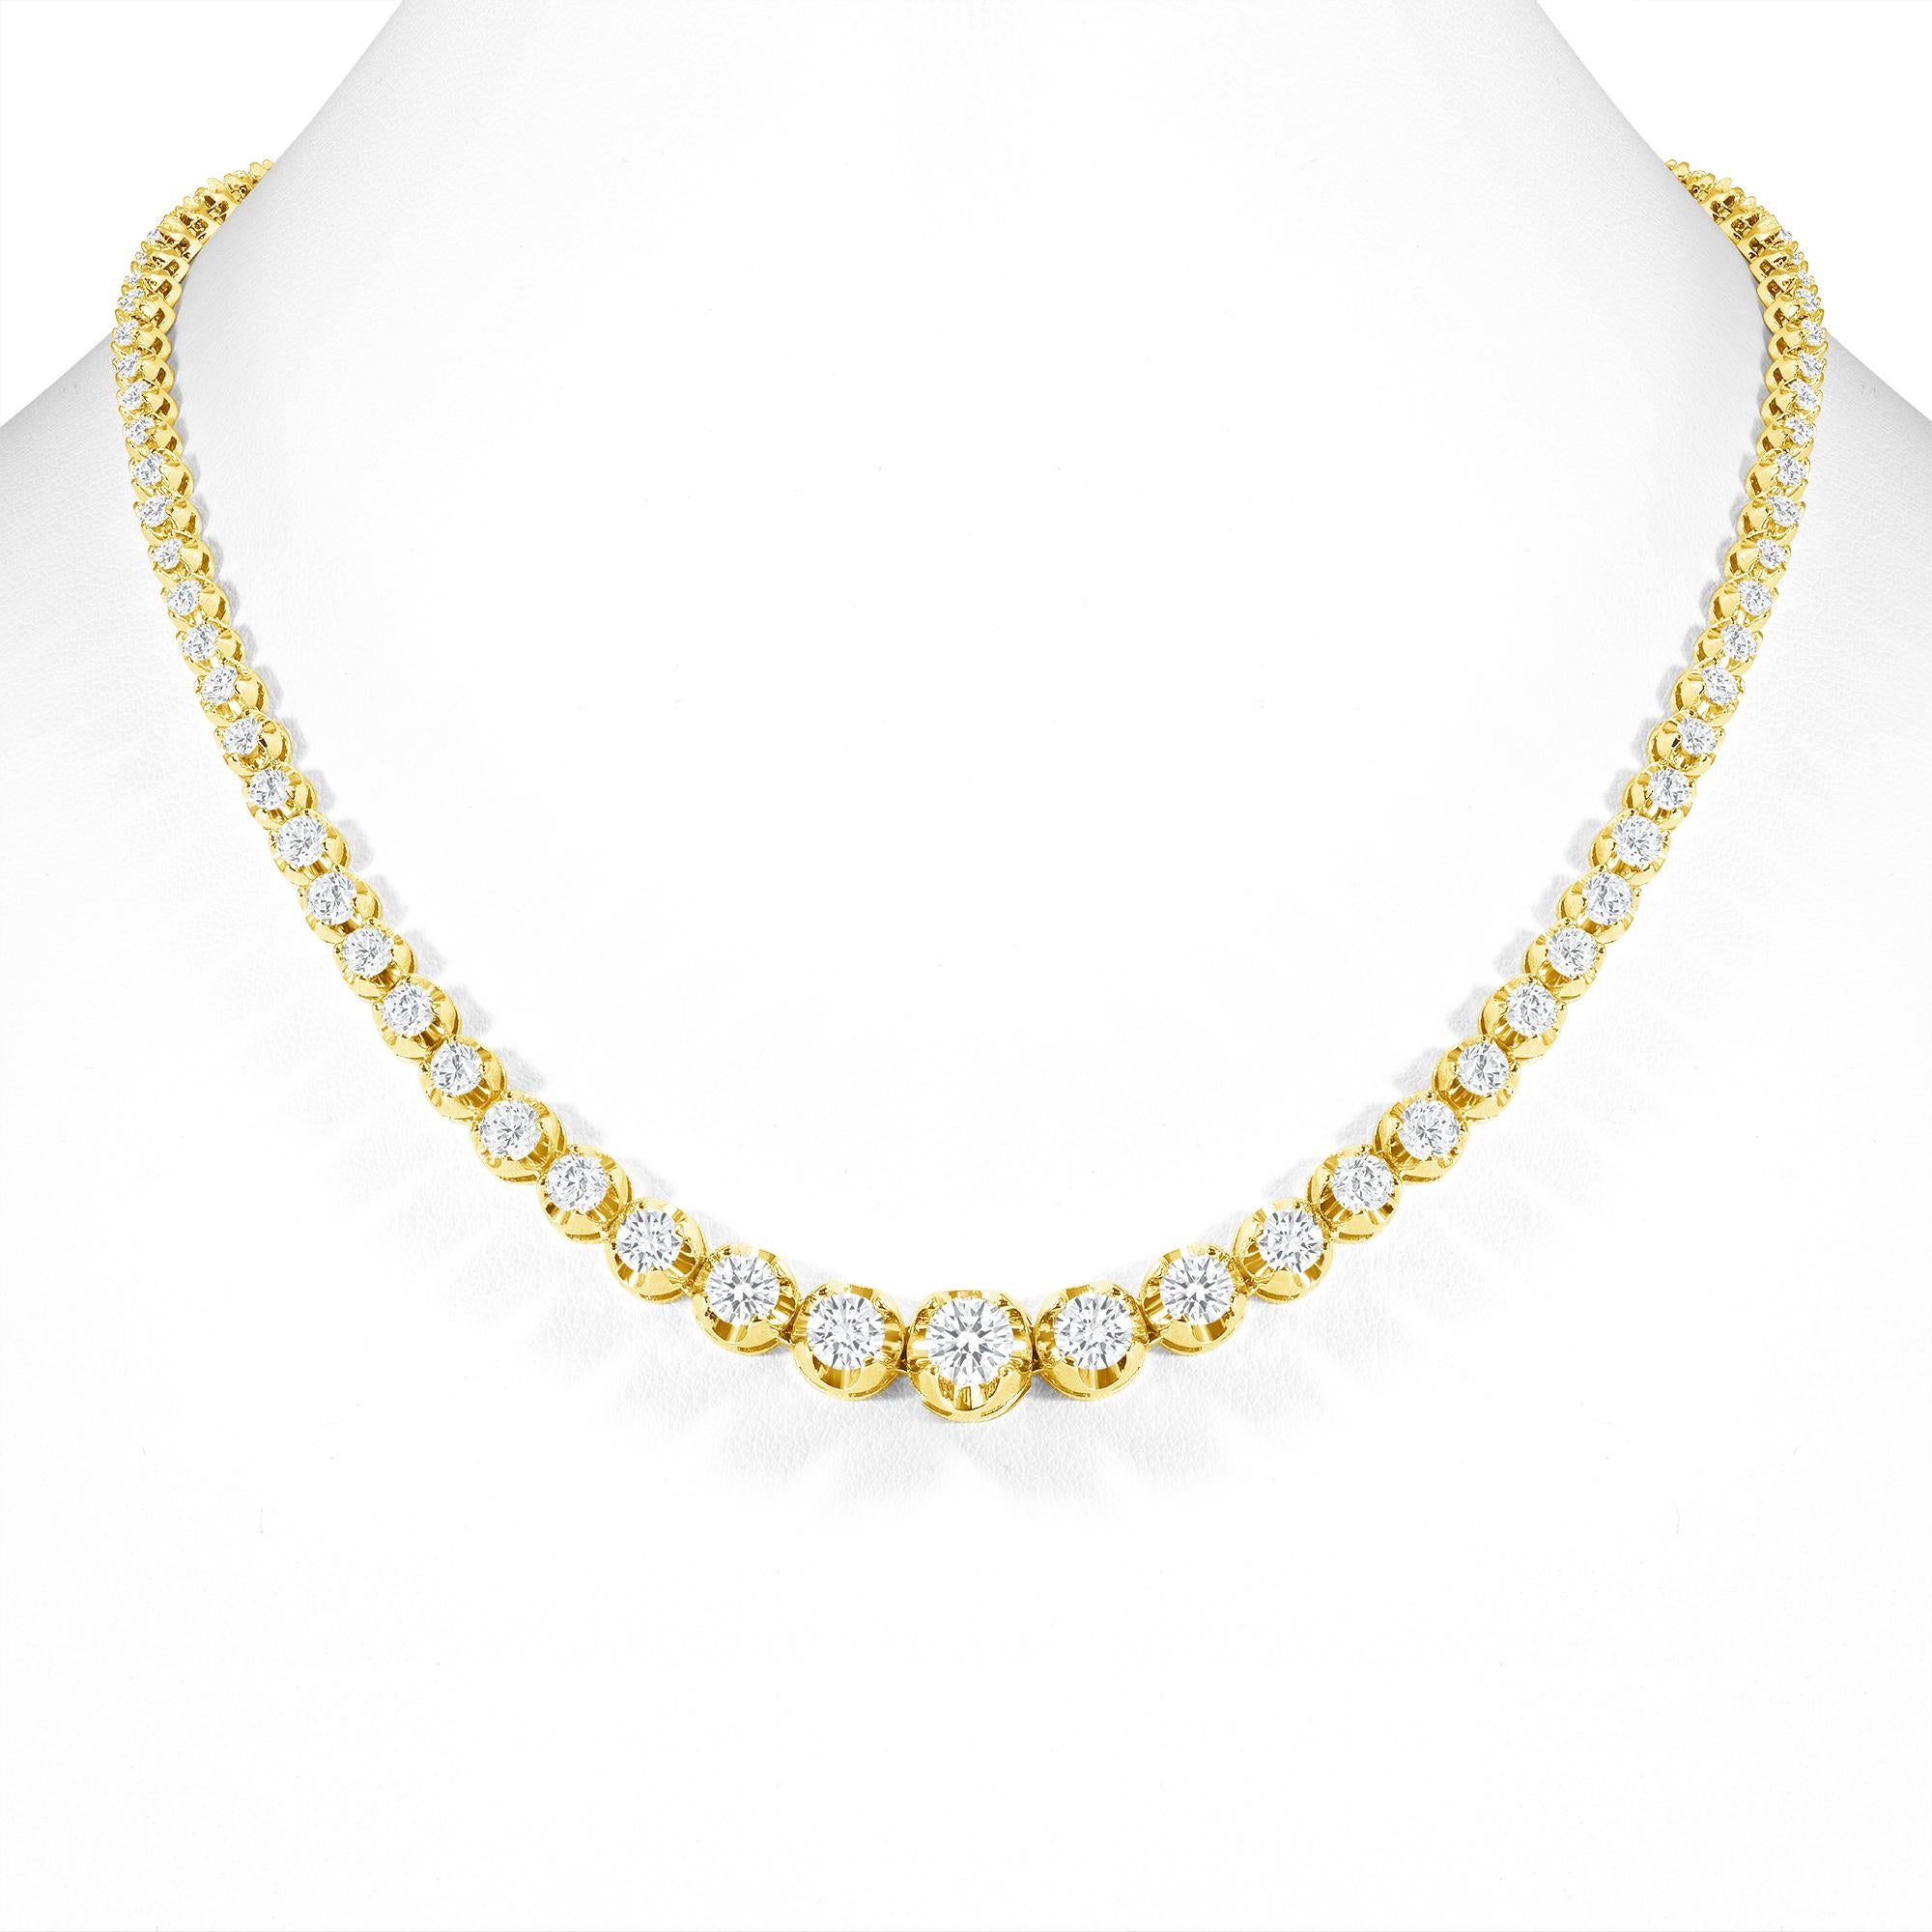 This finely made graduated necklace with beautiful round diamonds sits elegantly on any neck. 

Metal: 14k Gold
Diamond Cut: Round
Total Diamond Approx. Carats:  10ct
Diamond Clarity: VS
Diamond Color: F-G
Size: 18 inches
Color: Yellow Gold
Included